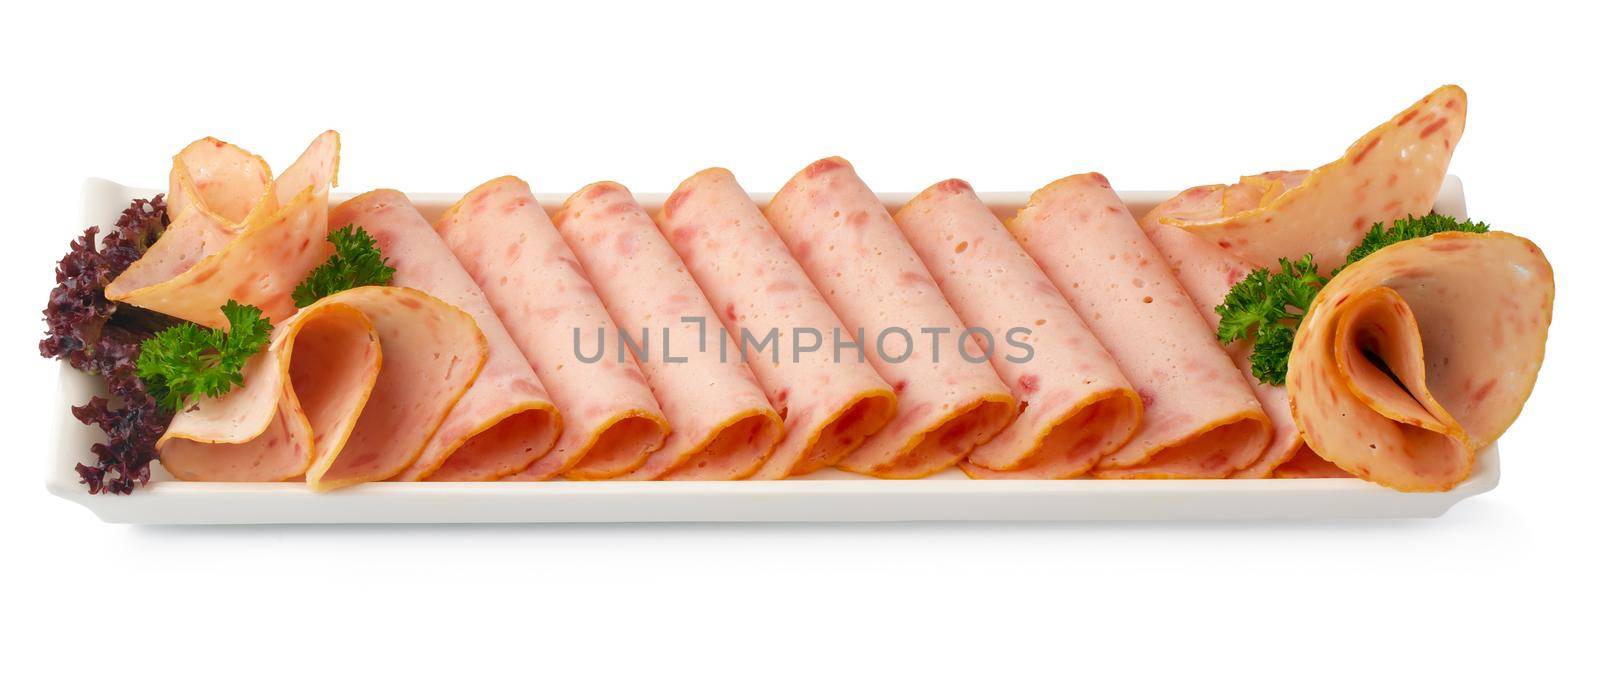 Cold smoked meat plate with salad leaves isolated on white background